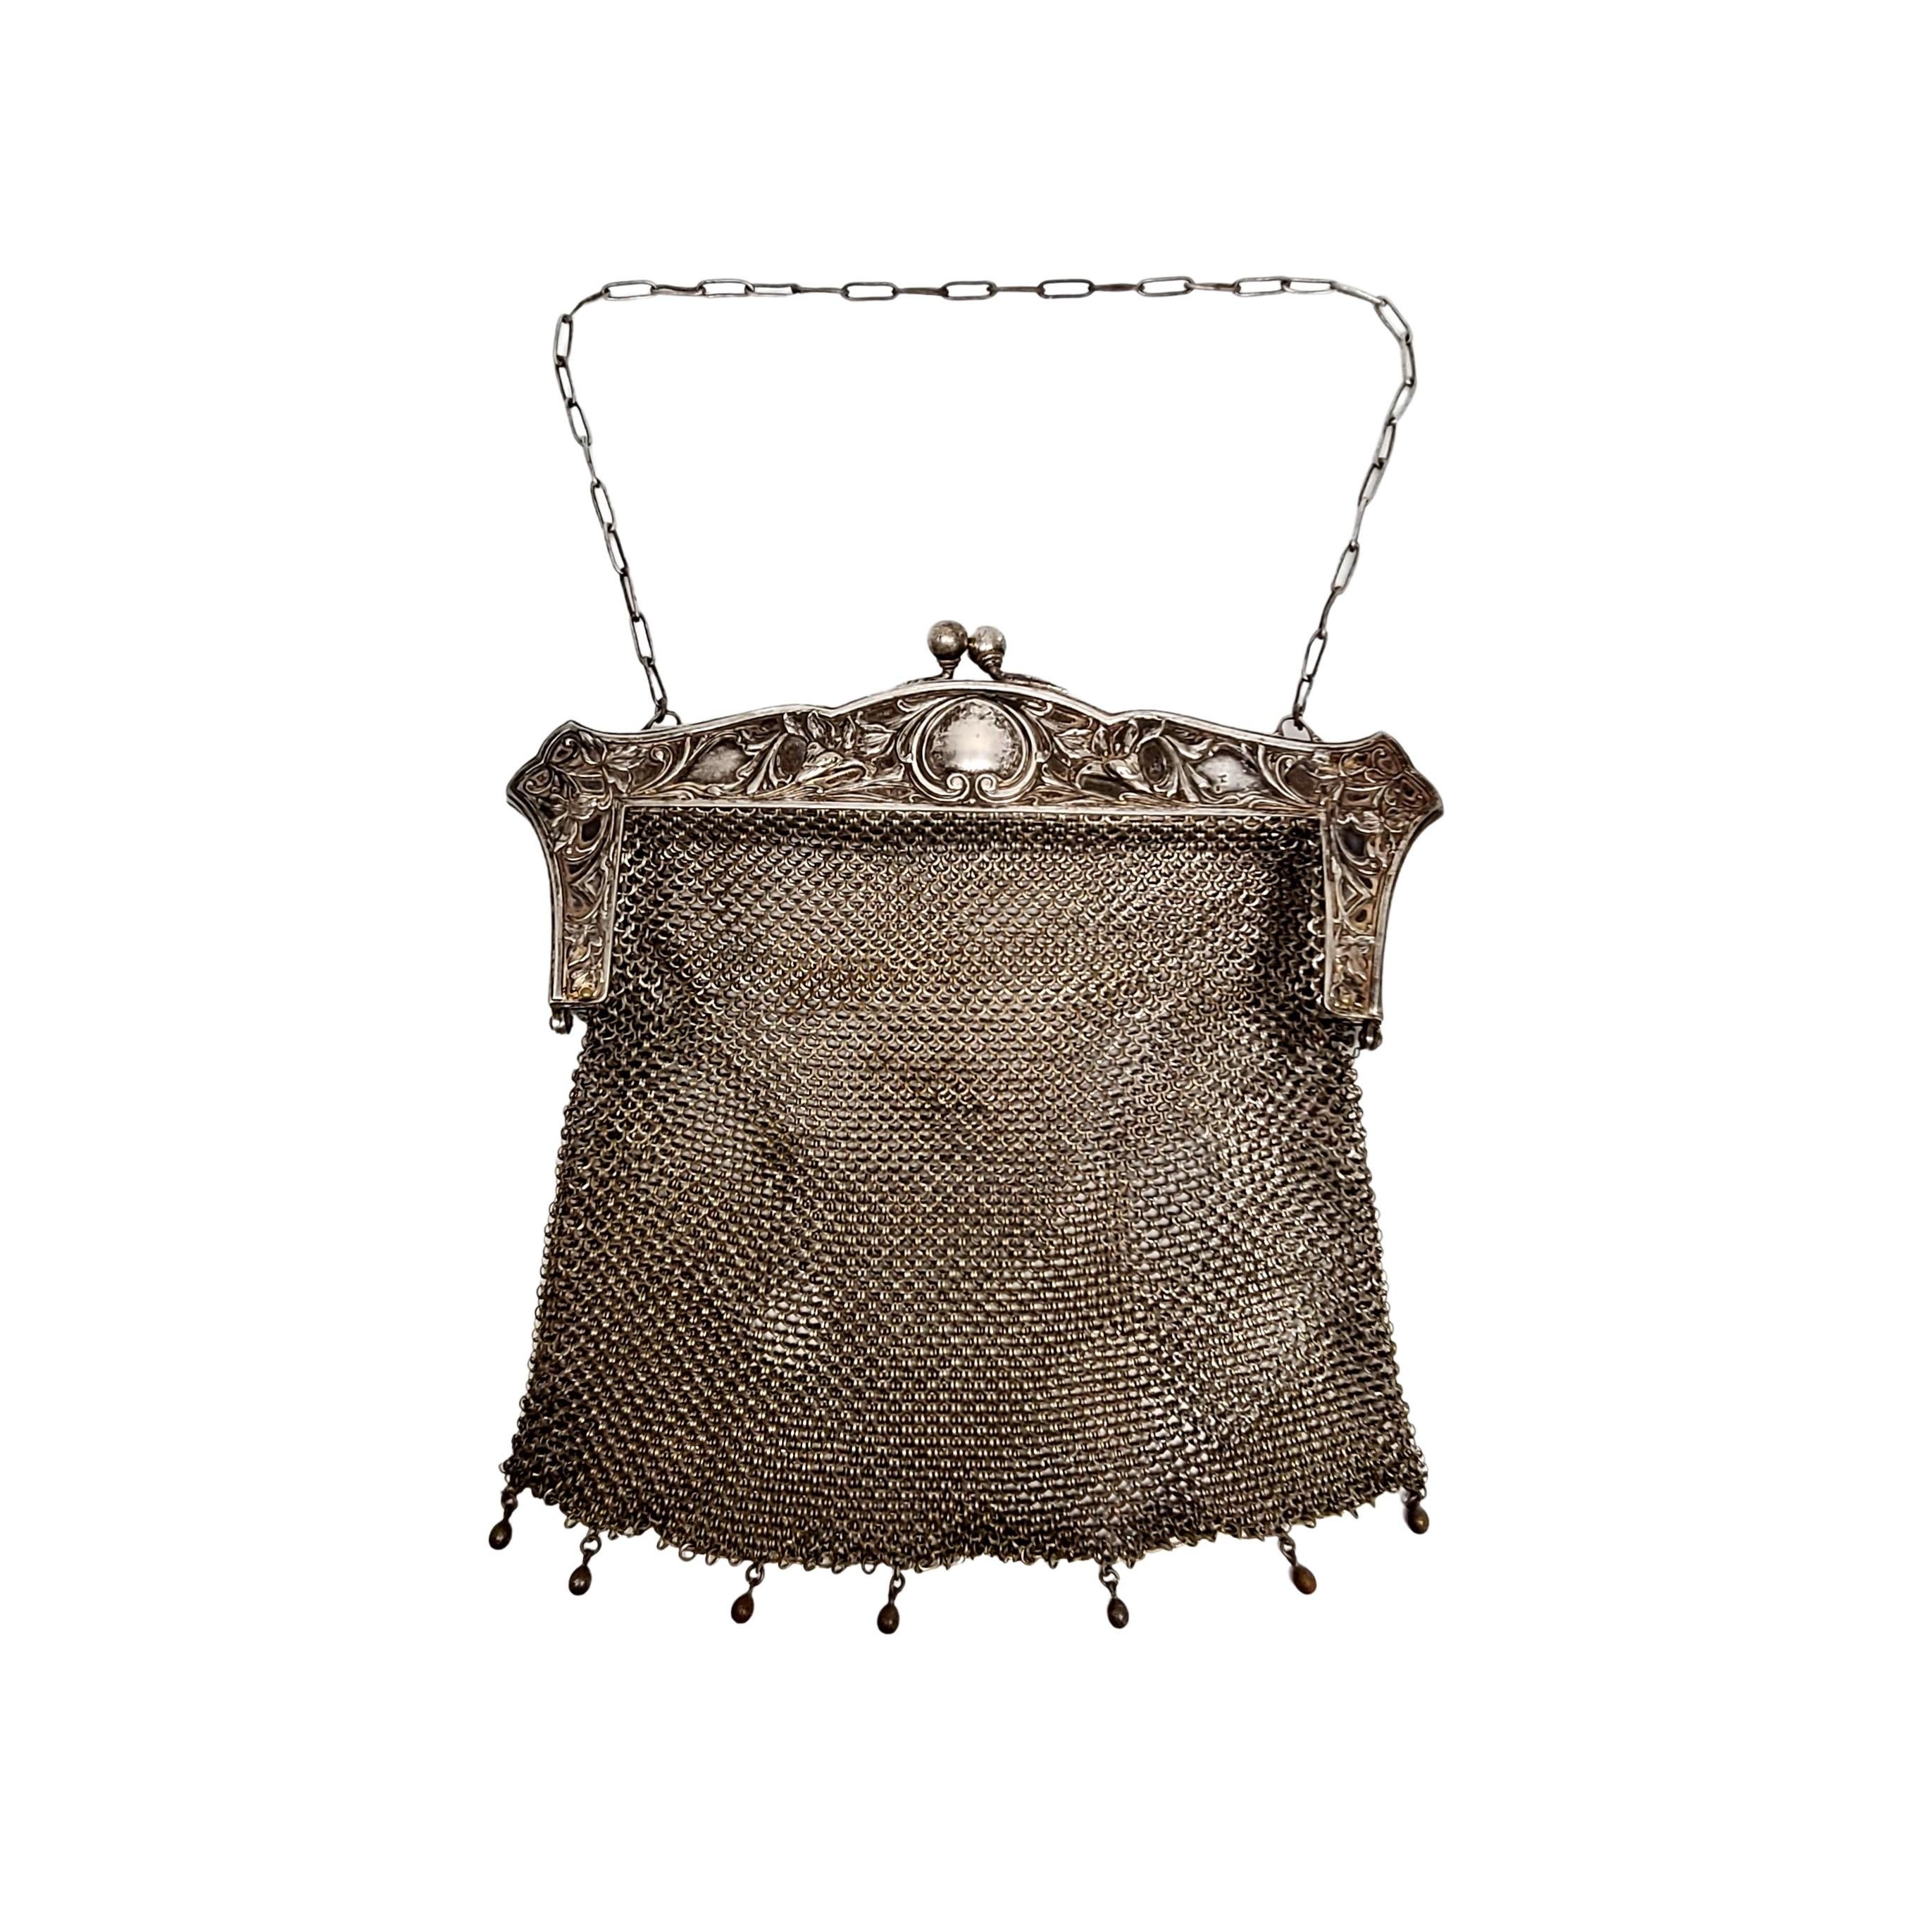 German silver mesh coin purse with chain strap by JWR Co.

Beautiful with its original warm finish, 